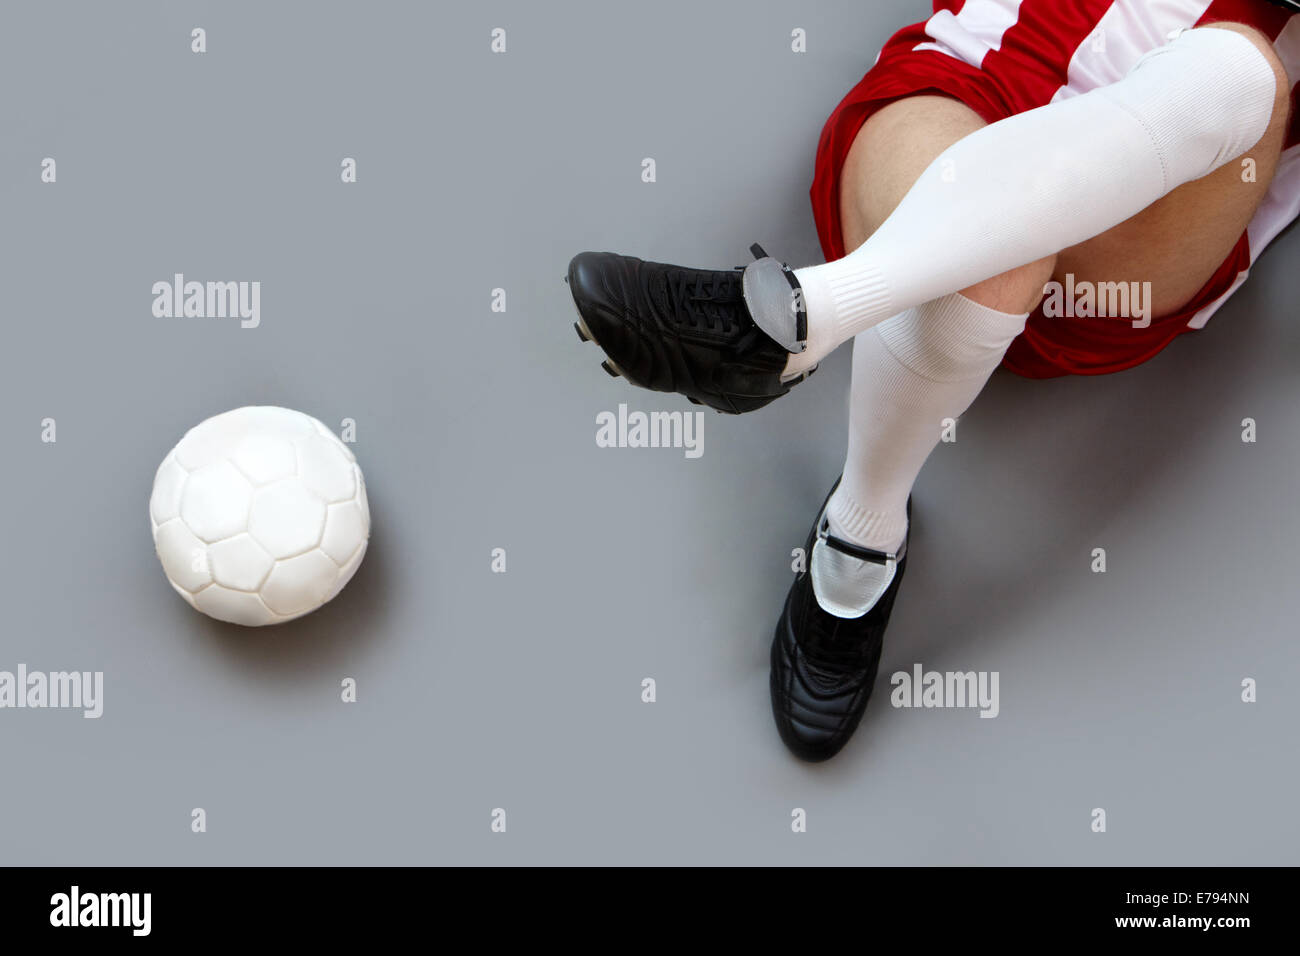 Sports player legs with soccer ball near by Stock Photo